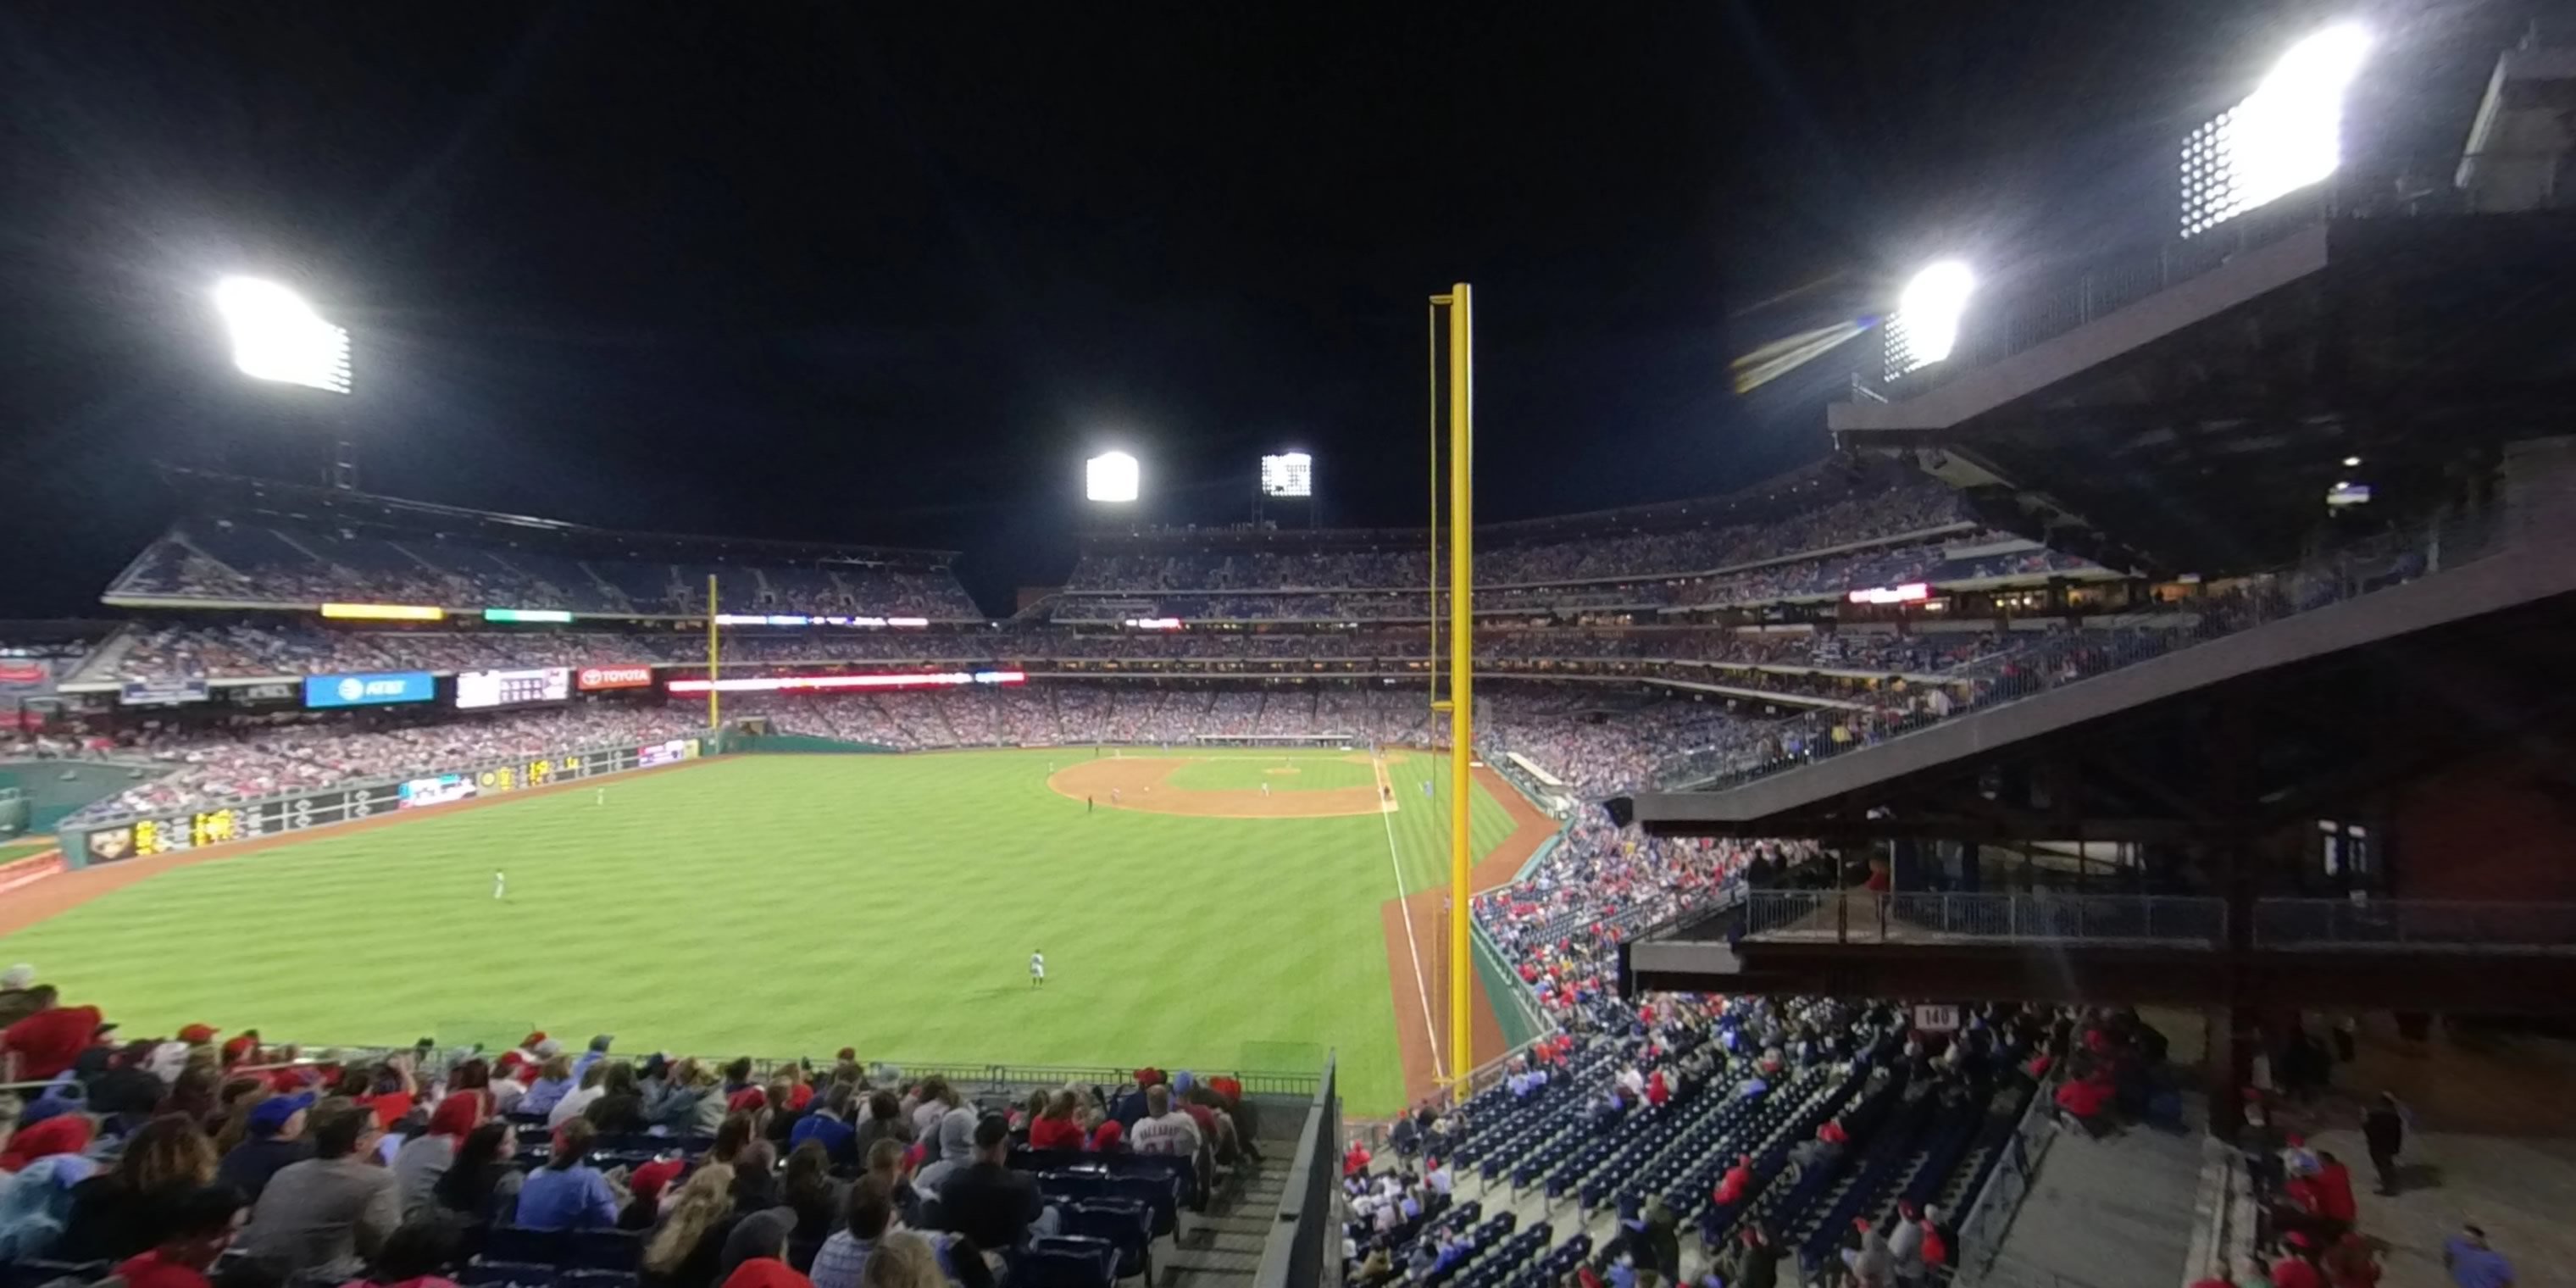 section 241 panoramic seat view  for baseball - citizens bank park